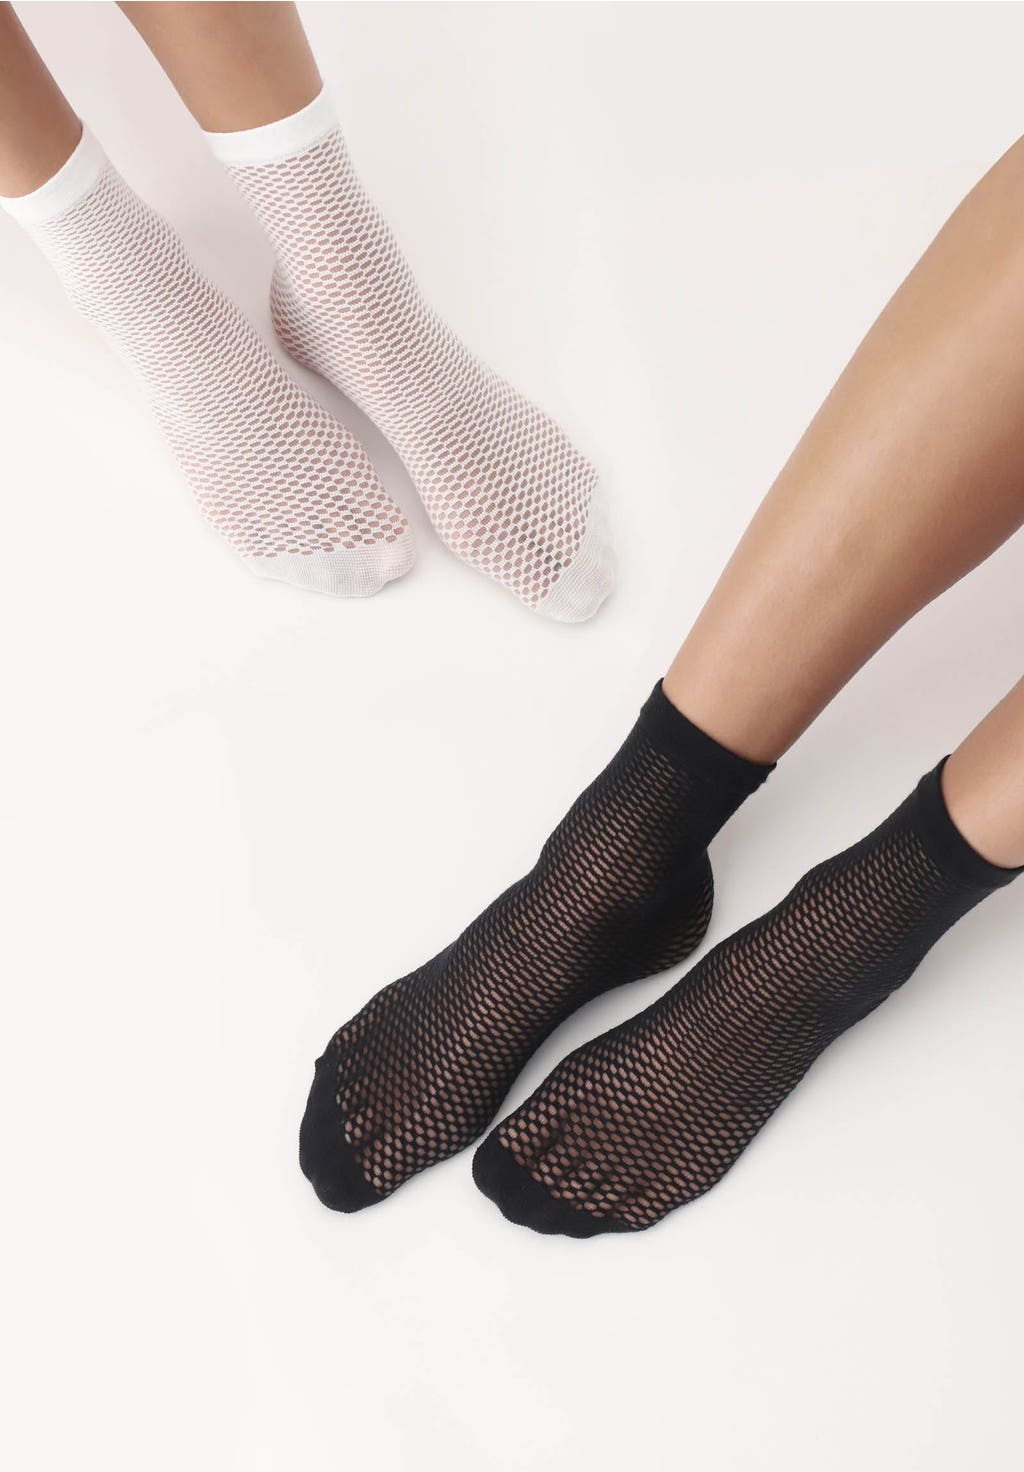 OroblÌ_ Twin Net Sock - Black and white cotton mix quarter high ankle tube socks twin pack with an enclosed fishnet style pattern, plain toe and thin cuff.